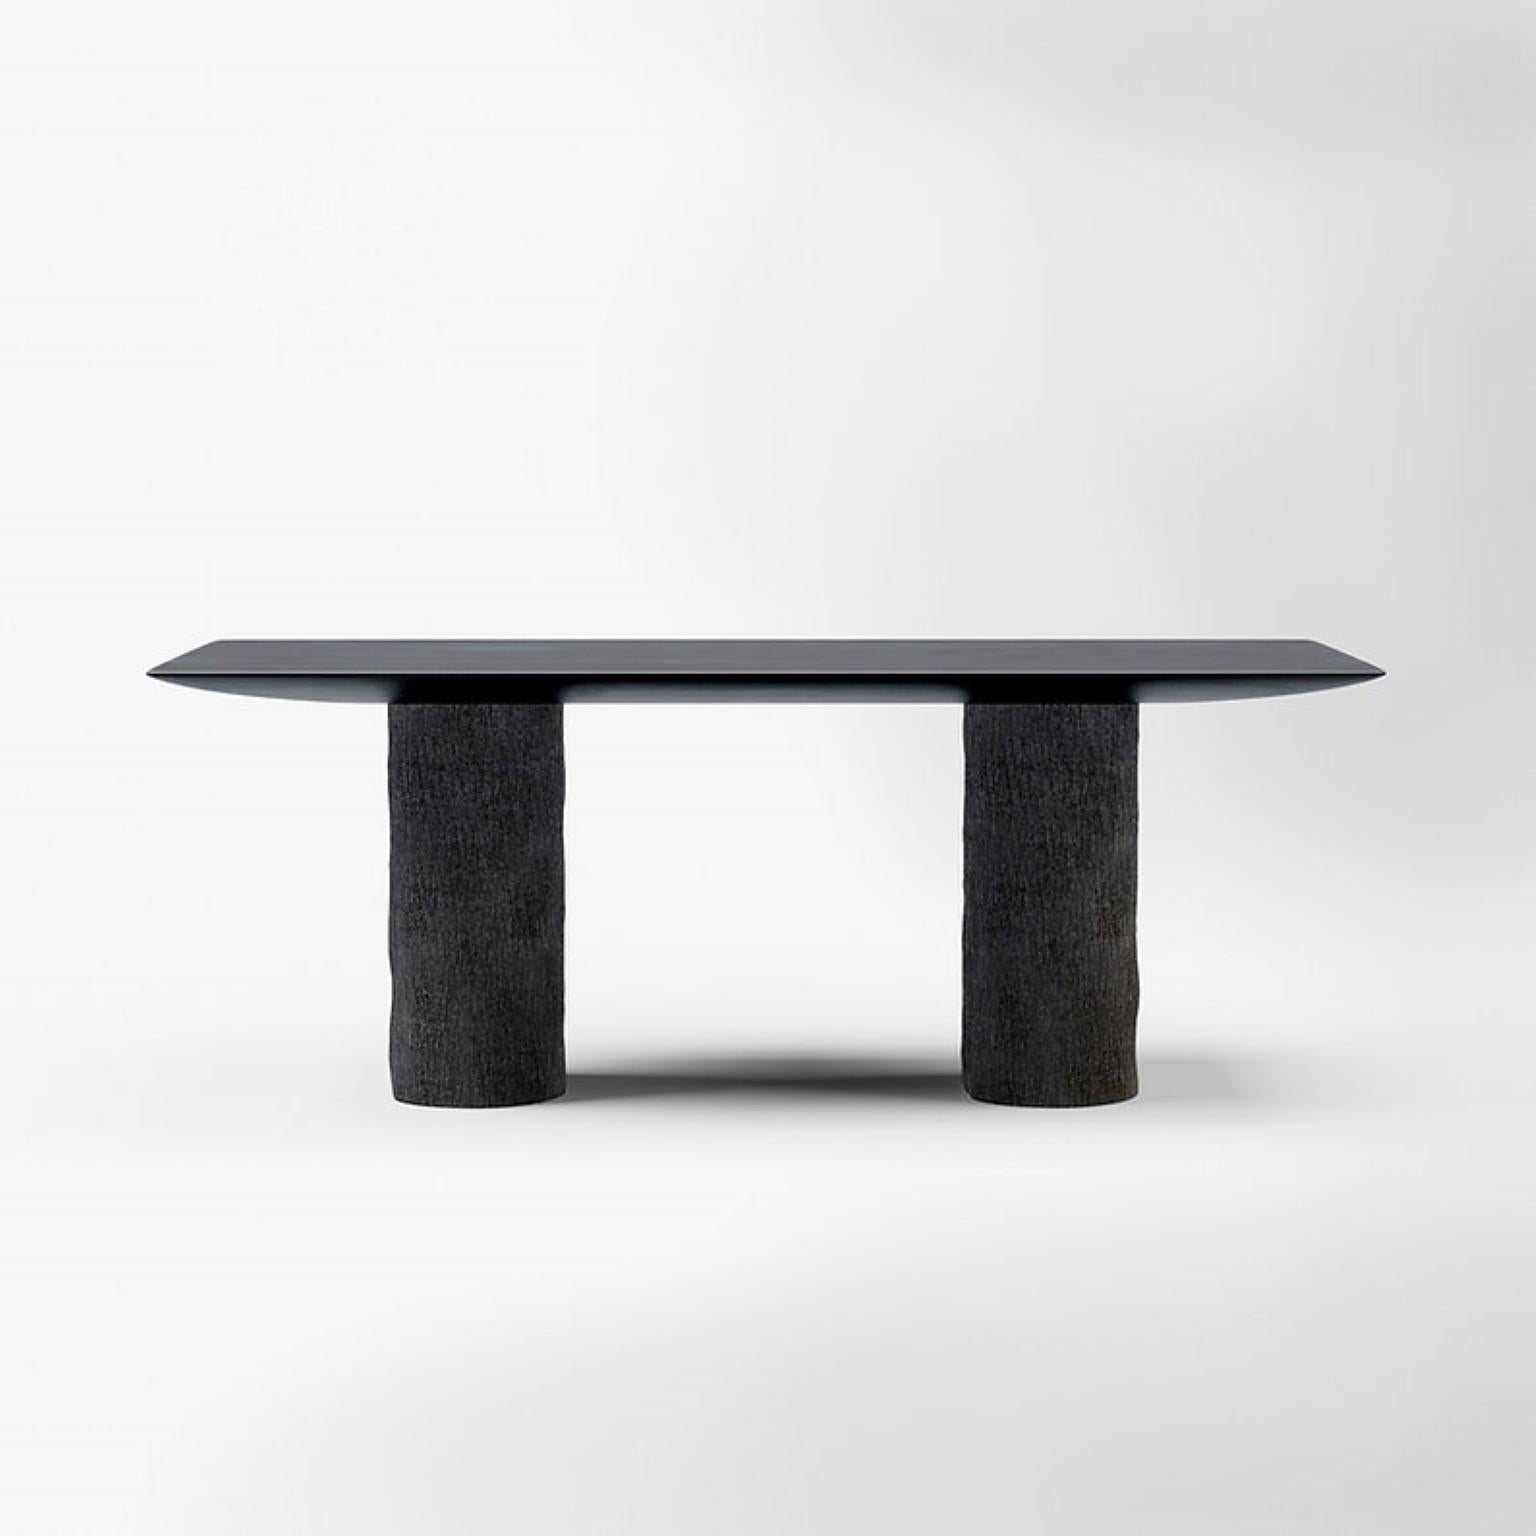 Veleten table by Faina.
Design: Victoriya Yakusha.
Materials: table top, wood, foot, ceramics / wood.
Dimensions: D 100 x L 200 x H 75 cm.

Two hundred kilos of massive clay legs and a solid wood top — when you are at Veleten table, the world